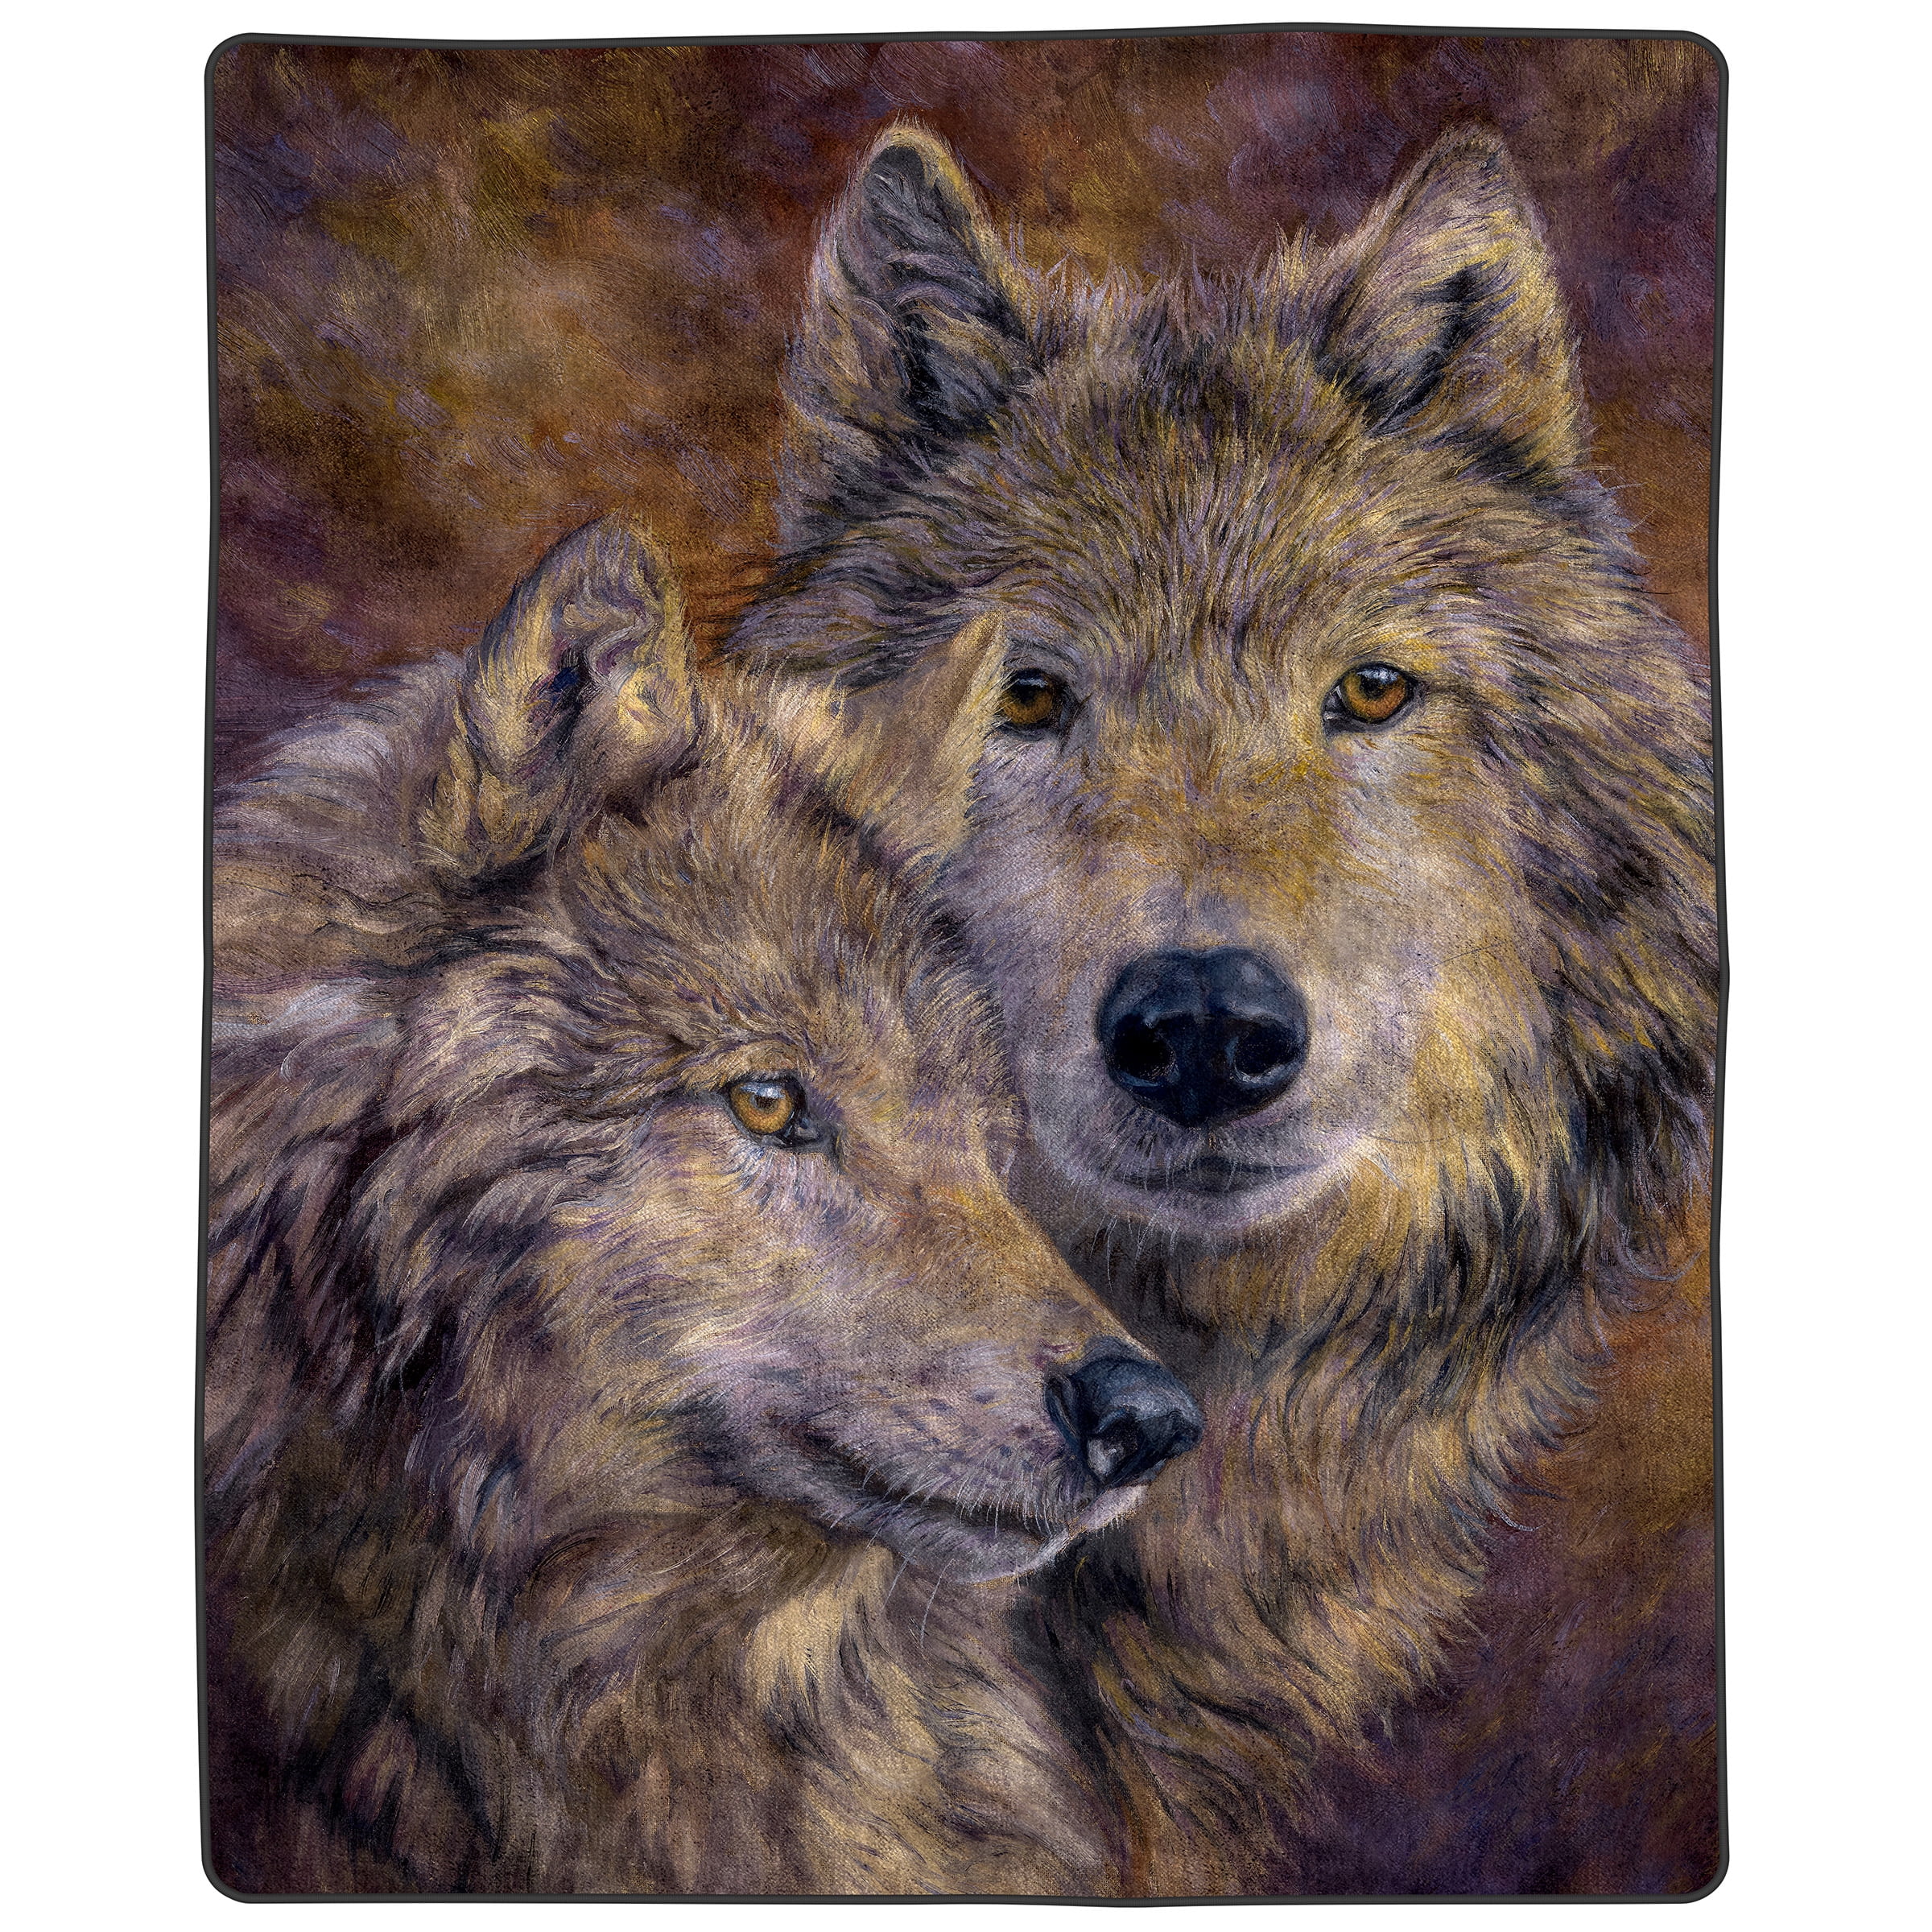 Details about   3D Feather Wolf NA738 Warm Plush Fleece Blanket Picnic Sofa Couch Quilt Bed Fay 